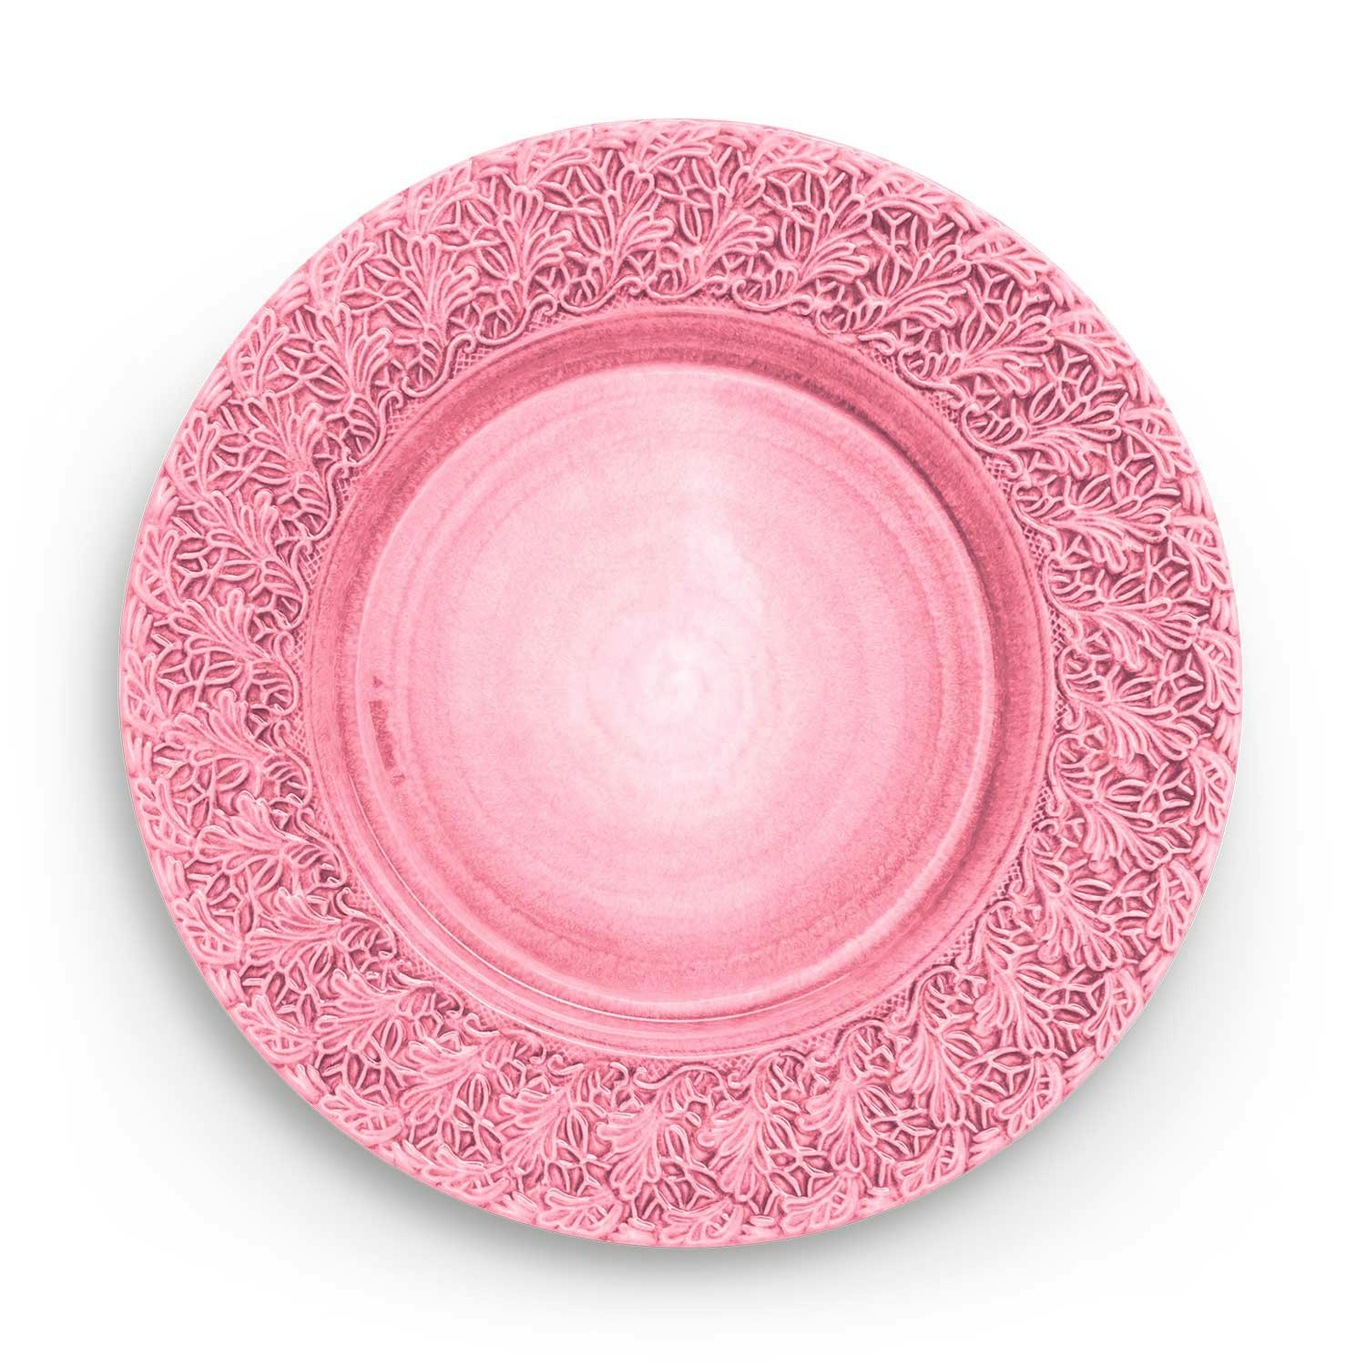 Lace Plate 32 cm, Pink